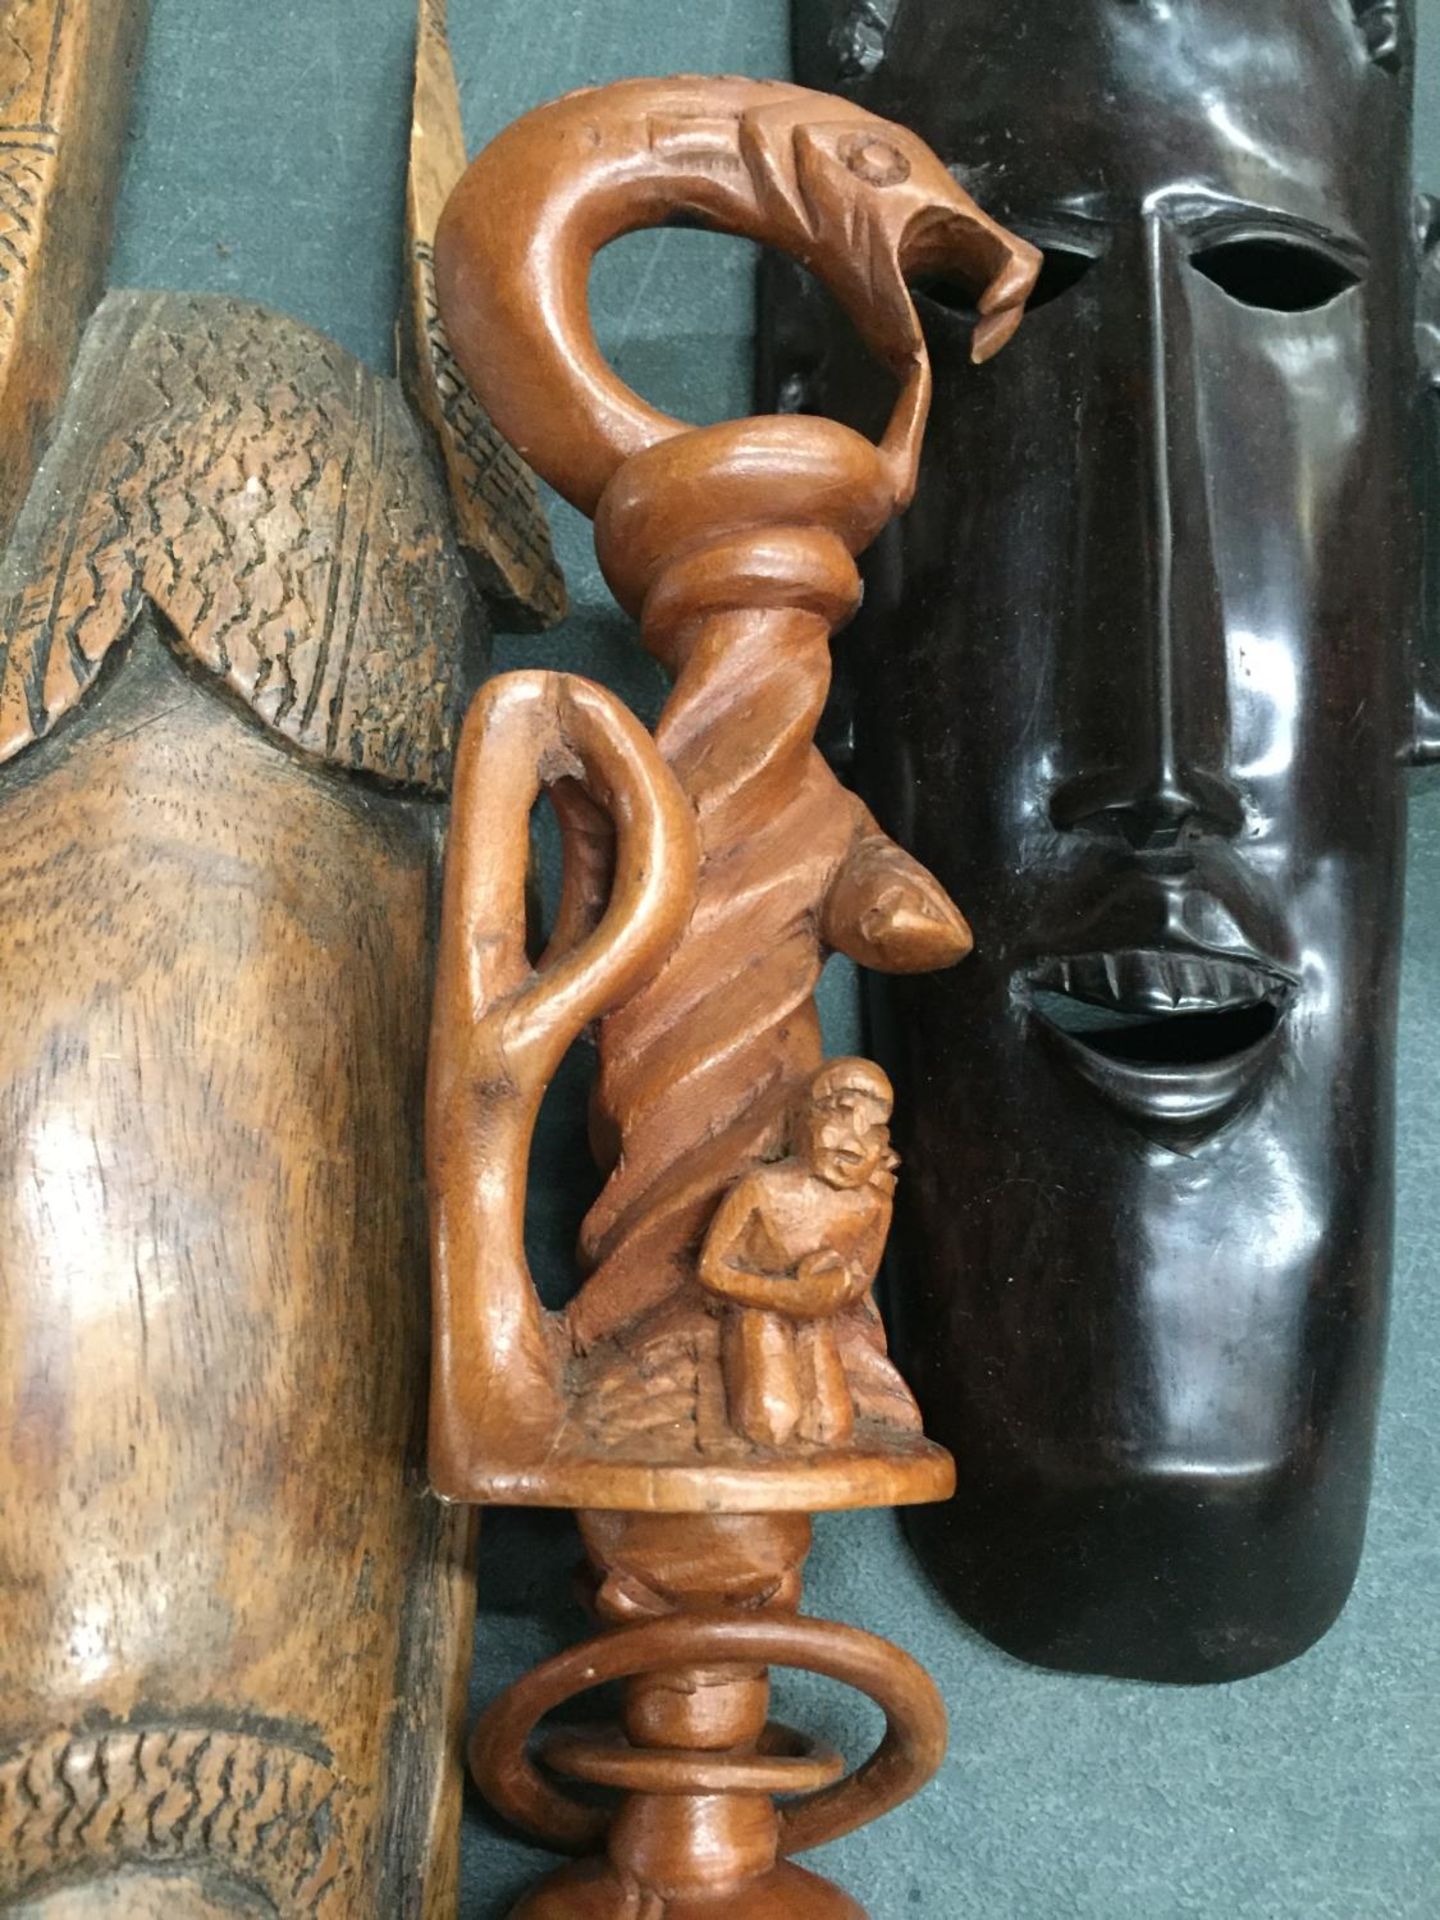 TWO AFRICAN STYLE FACE MASKS PLUS A TRIBAL STYLE CARVED STICK WITH SERPENT DESIGN - Image 3 of 4